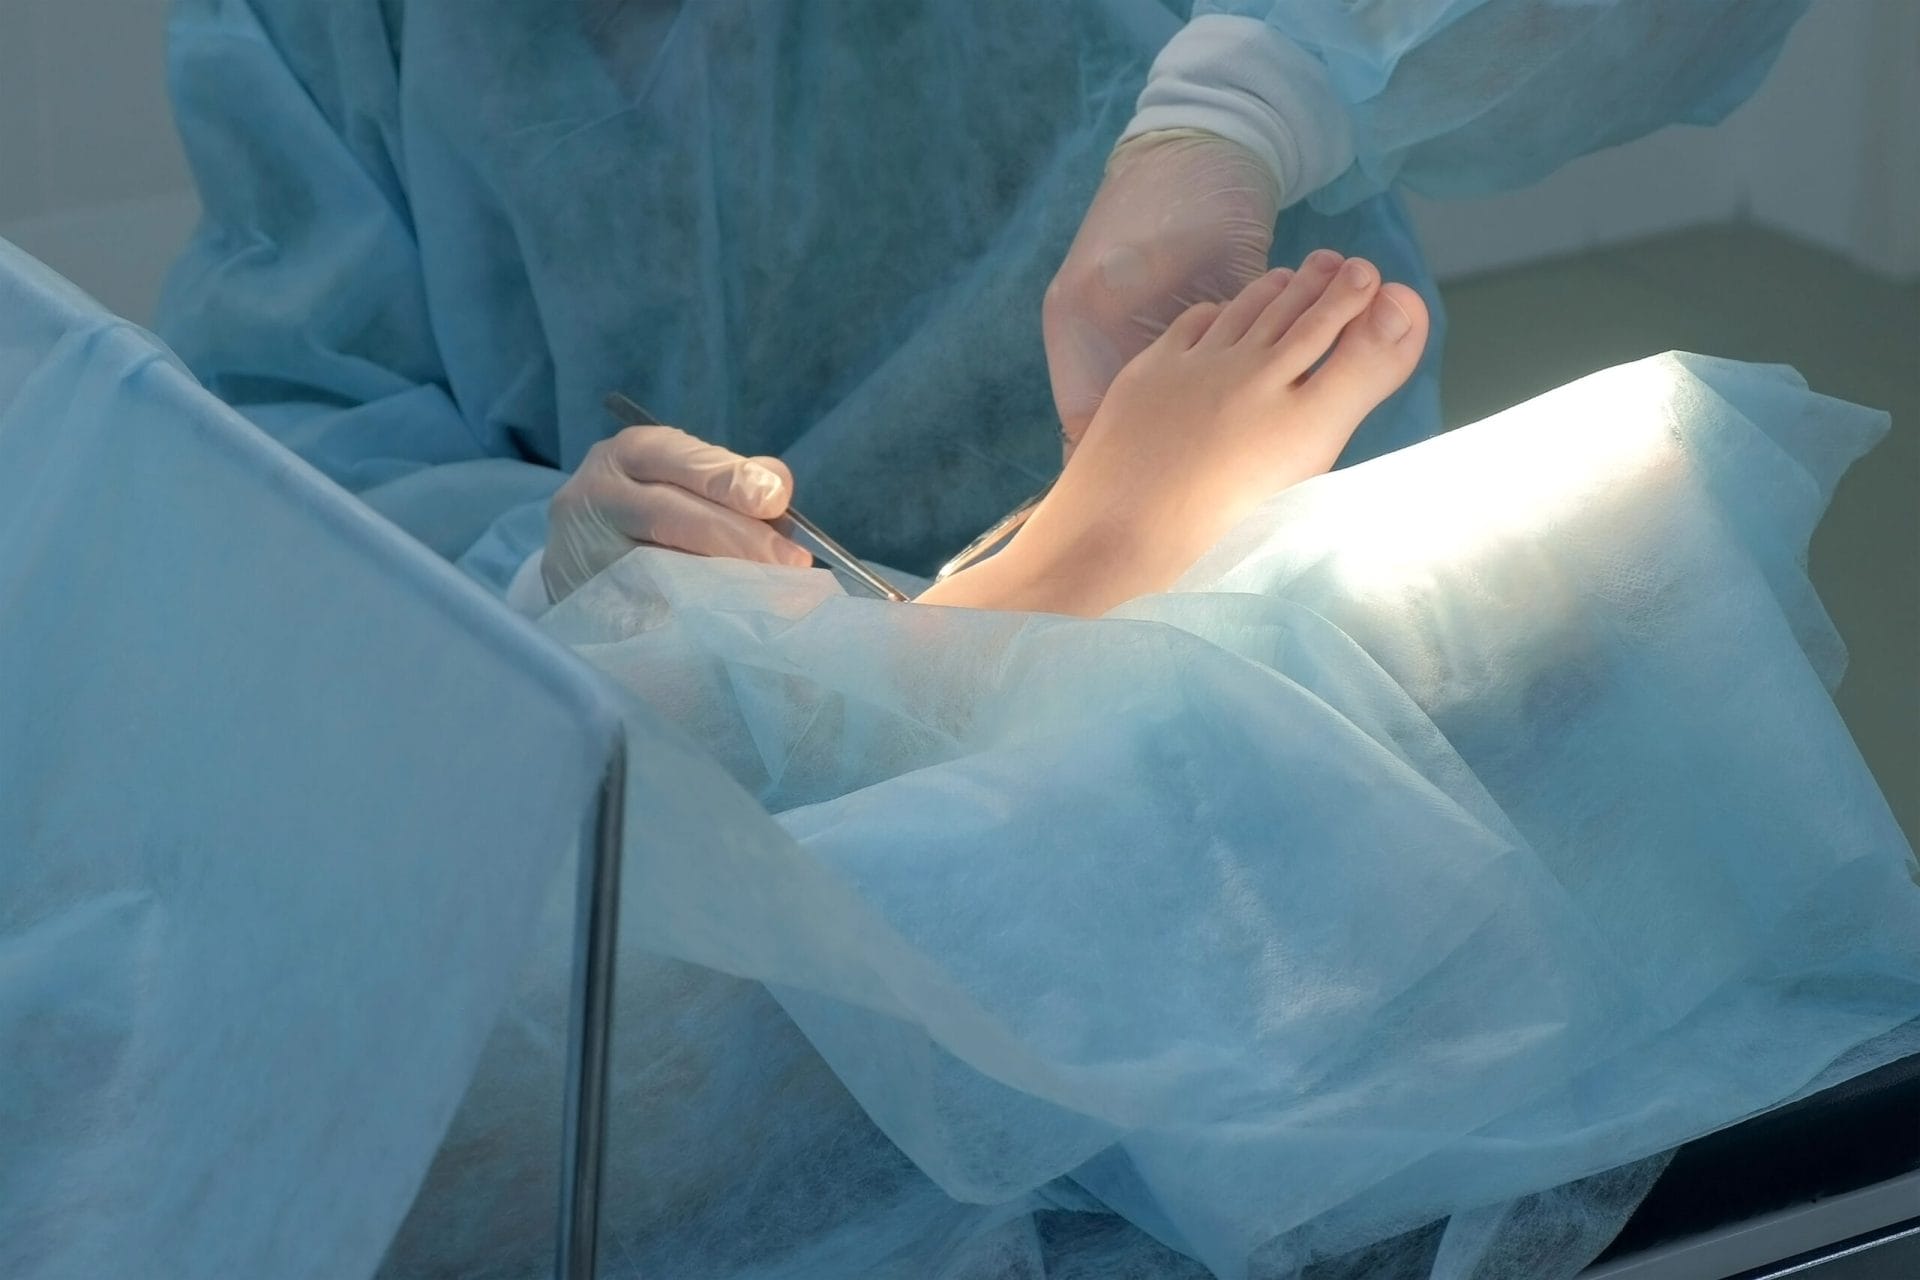 Surgeon man making surgery of removal ankle hygroma on leg in hospital in operating room, hands closeup. Doctor using medical tools clamp and tweezers. Surgical treatment of hygroma.